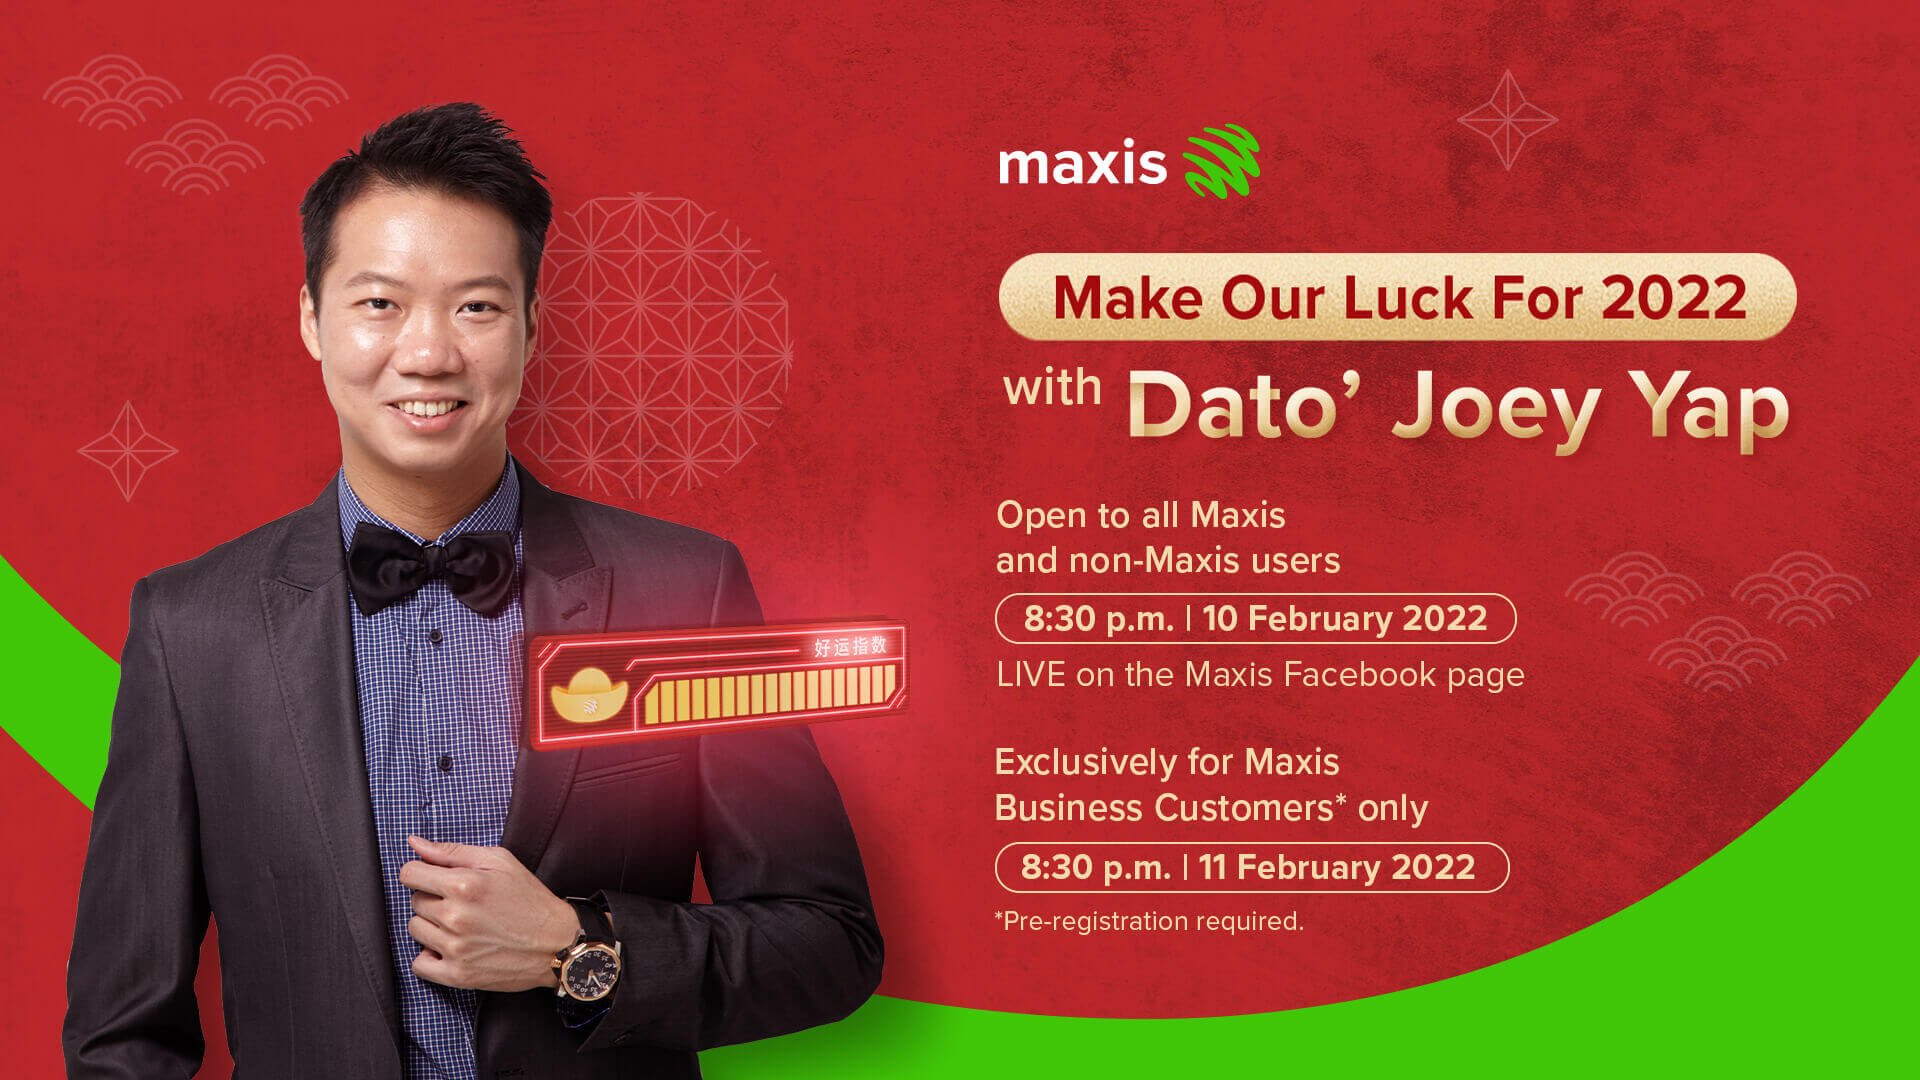 Maxis Make Our Luck For 2022 with Dato' Joey Yap